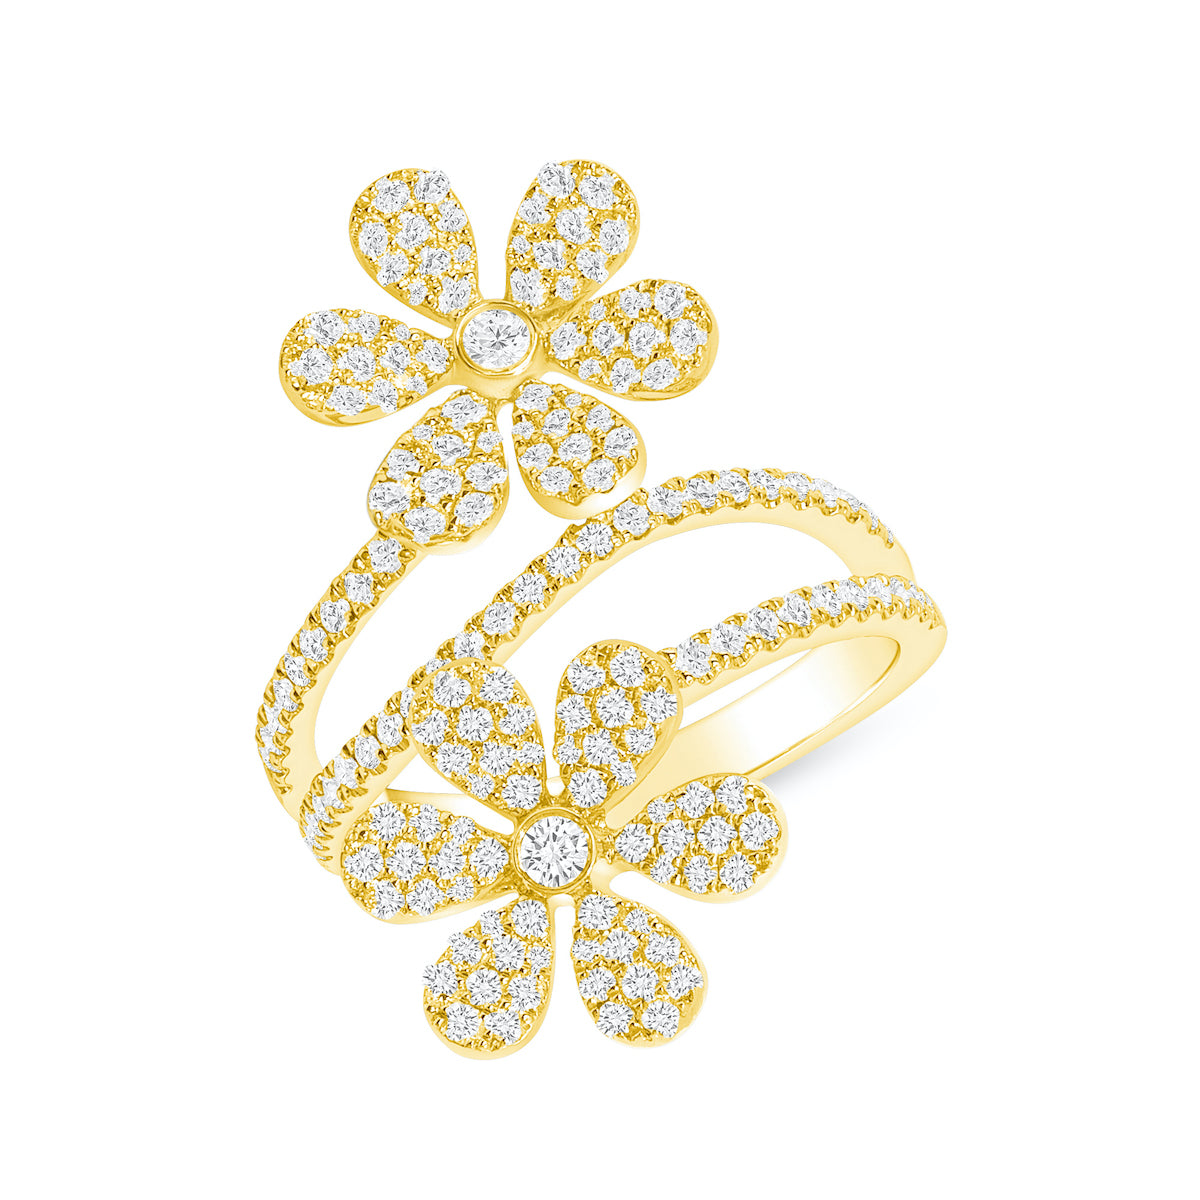 Load image into Gallery viewer, Spiral Daisy Ring - Happy Jewelers Fine Jewelry Lifetime Warranty
